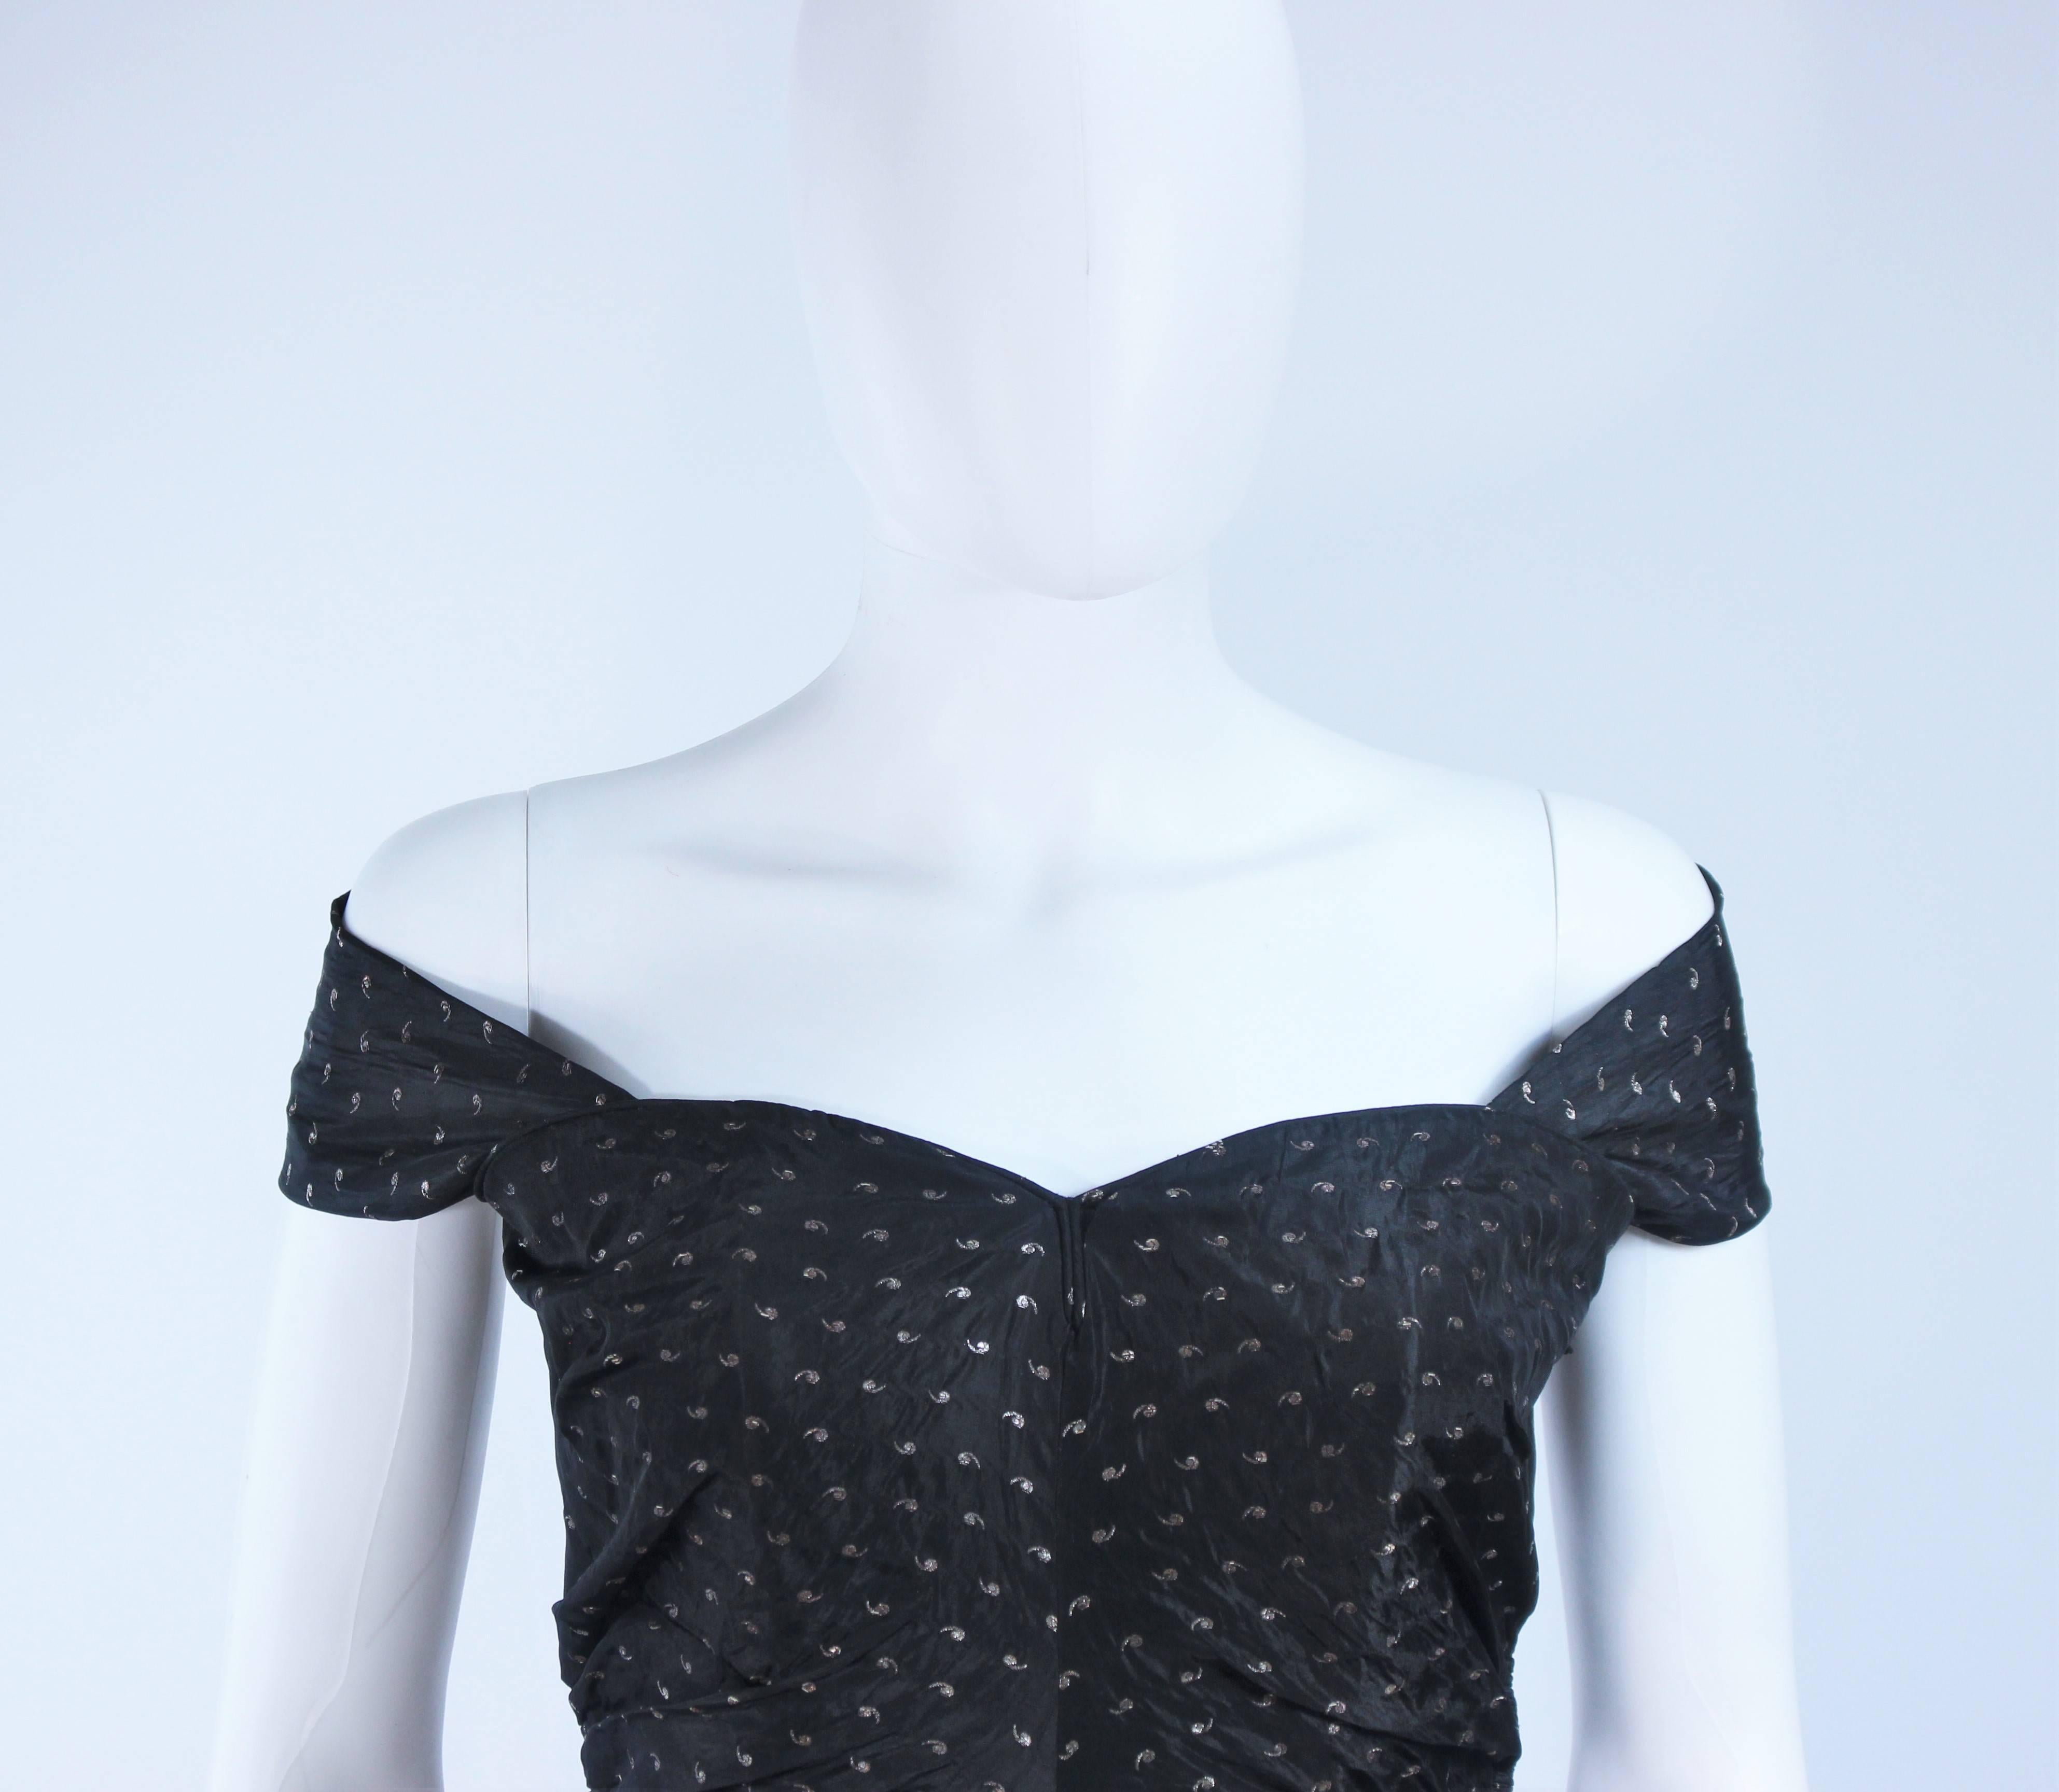 CEIL CHAPMAN Black & Gold Metallic Gown with Peplum Size 2 4 In Excellent Condition For Sale In Los Angeles, CA